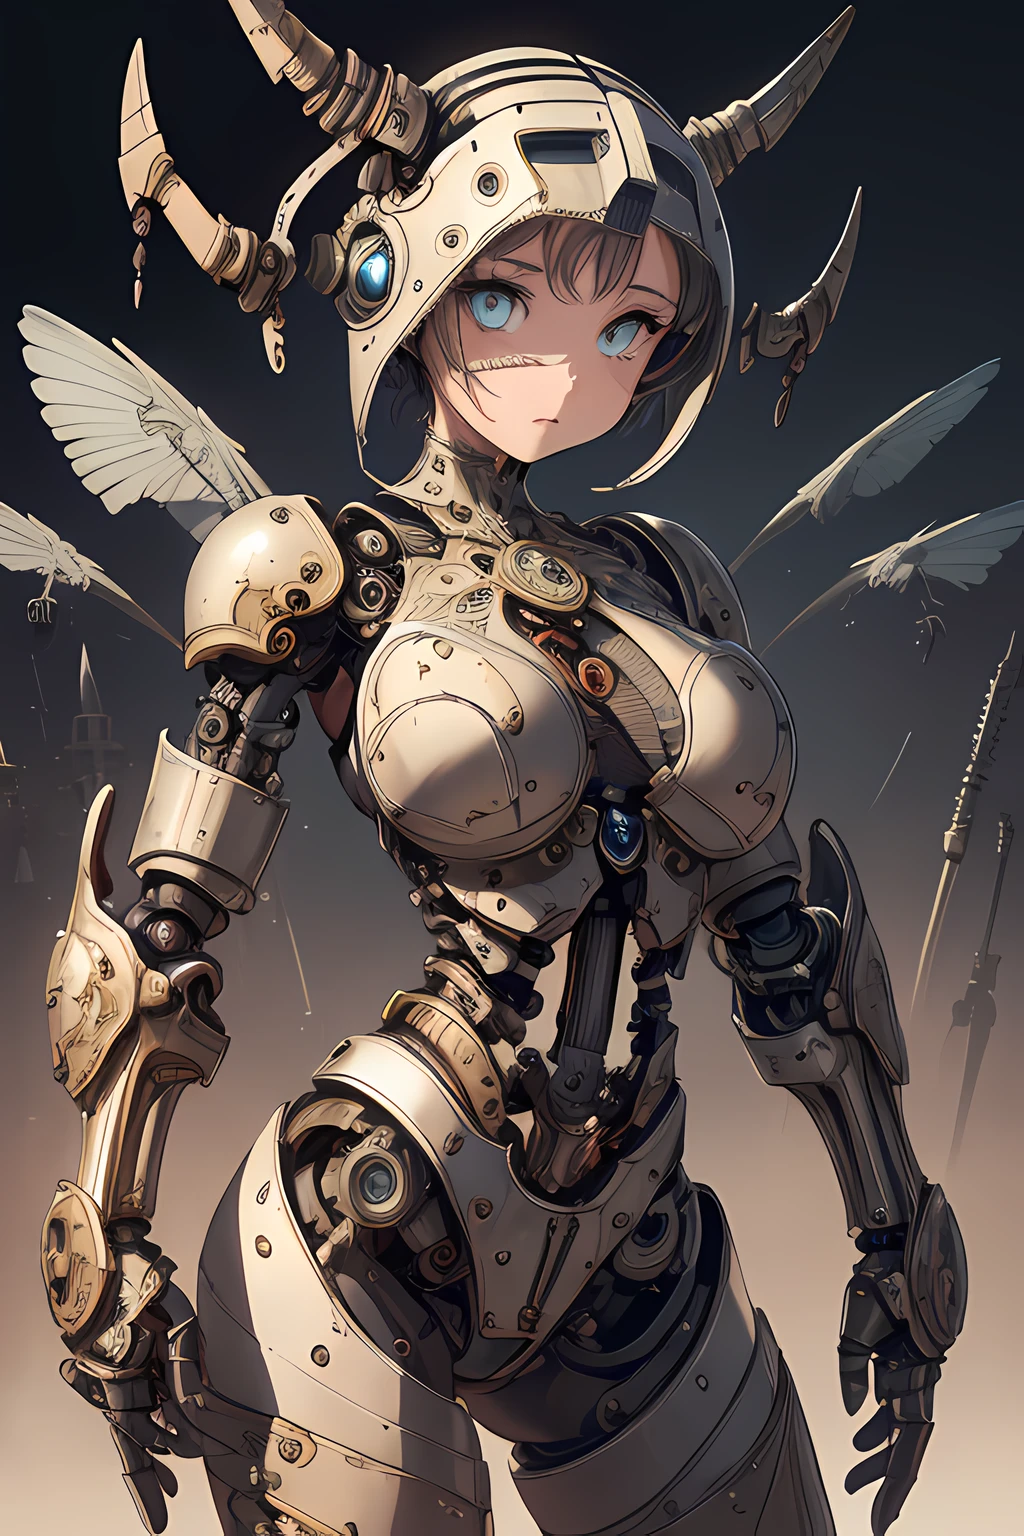 (absurdres, highres, ultra detailed, (1girl:1.3),
BREAK
, Warforged, mechanical body, integrated weapons, durable armor, clockwork enhancements, steam-powered strength
BREAK
, naive art, childlike style, playful imagery, simple forms, vibrant colors, emotive expression, untrained aesthetic
BREAK
, music box art, intricate mechanisms, melodic creations, nostalgic charm, delicate craftsmanship, artistic engineering:1.2)